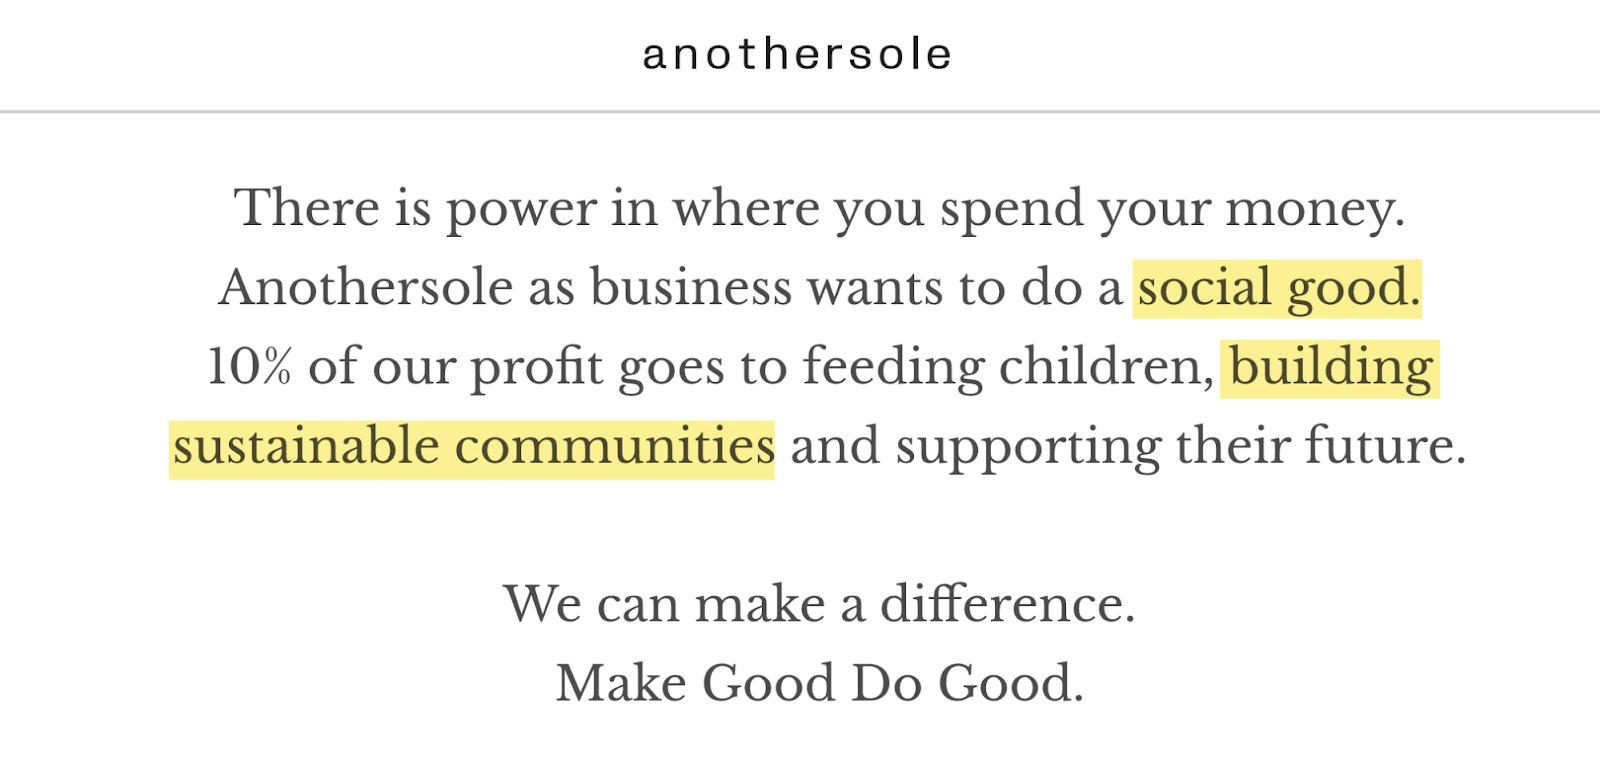 Statement from anothersole indicating how the company splits its profits